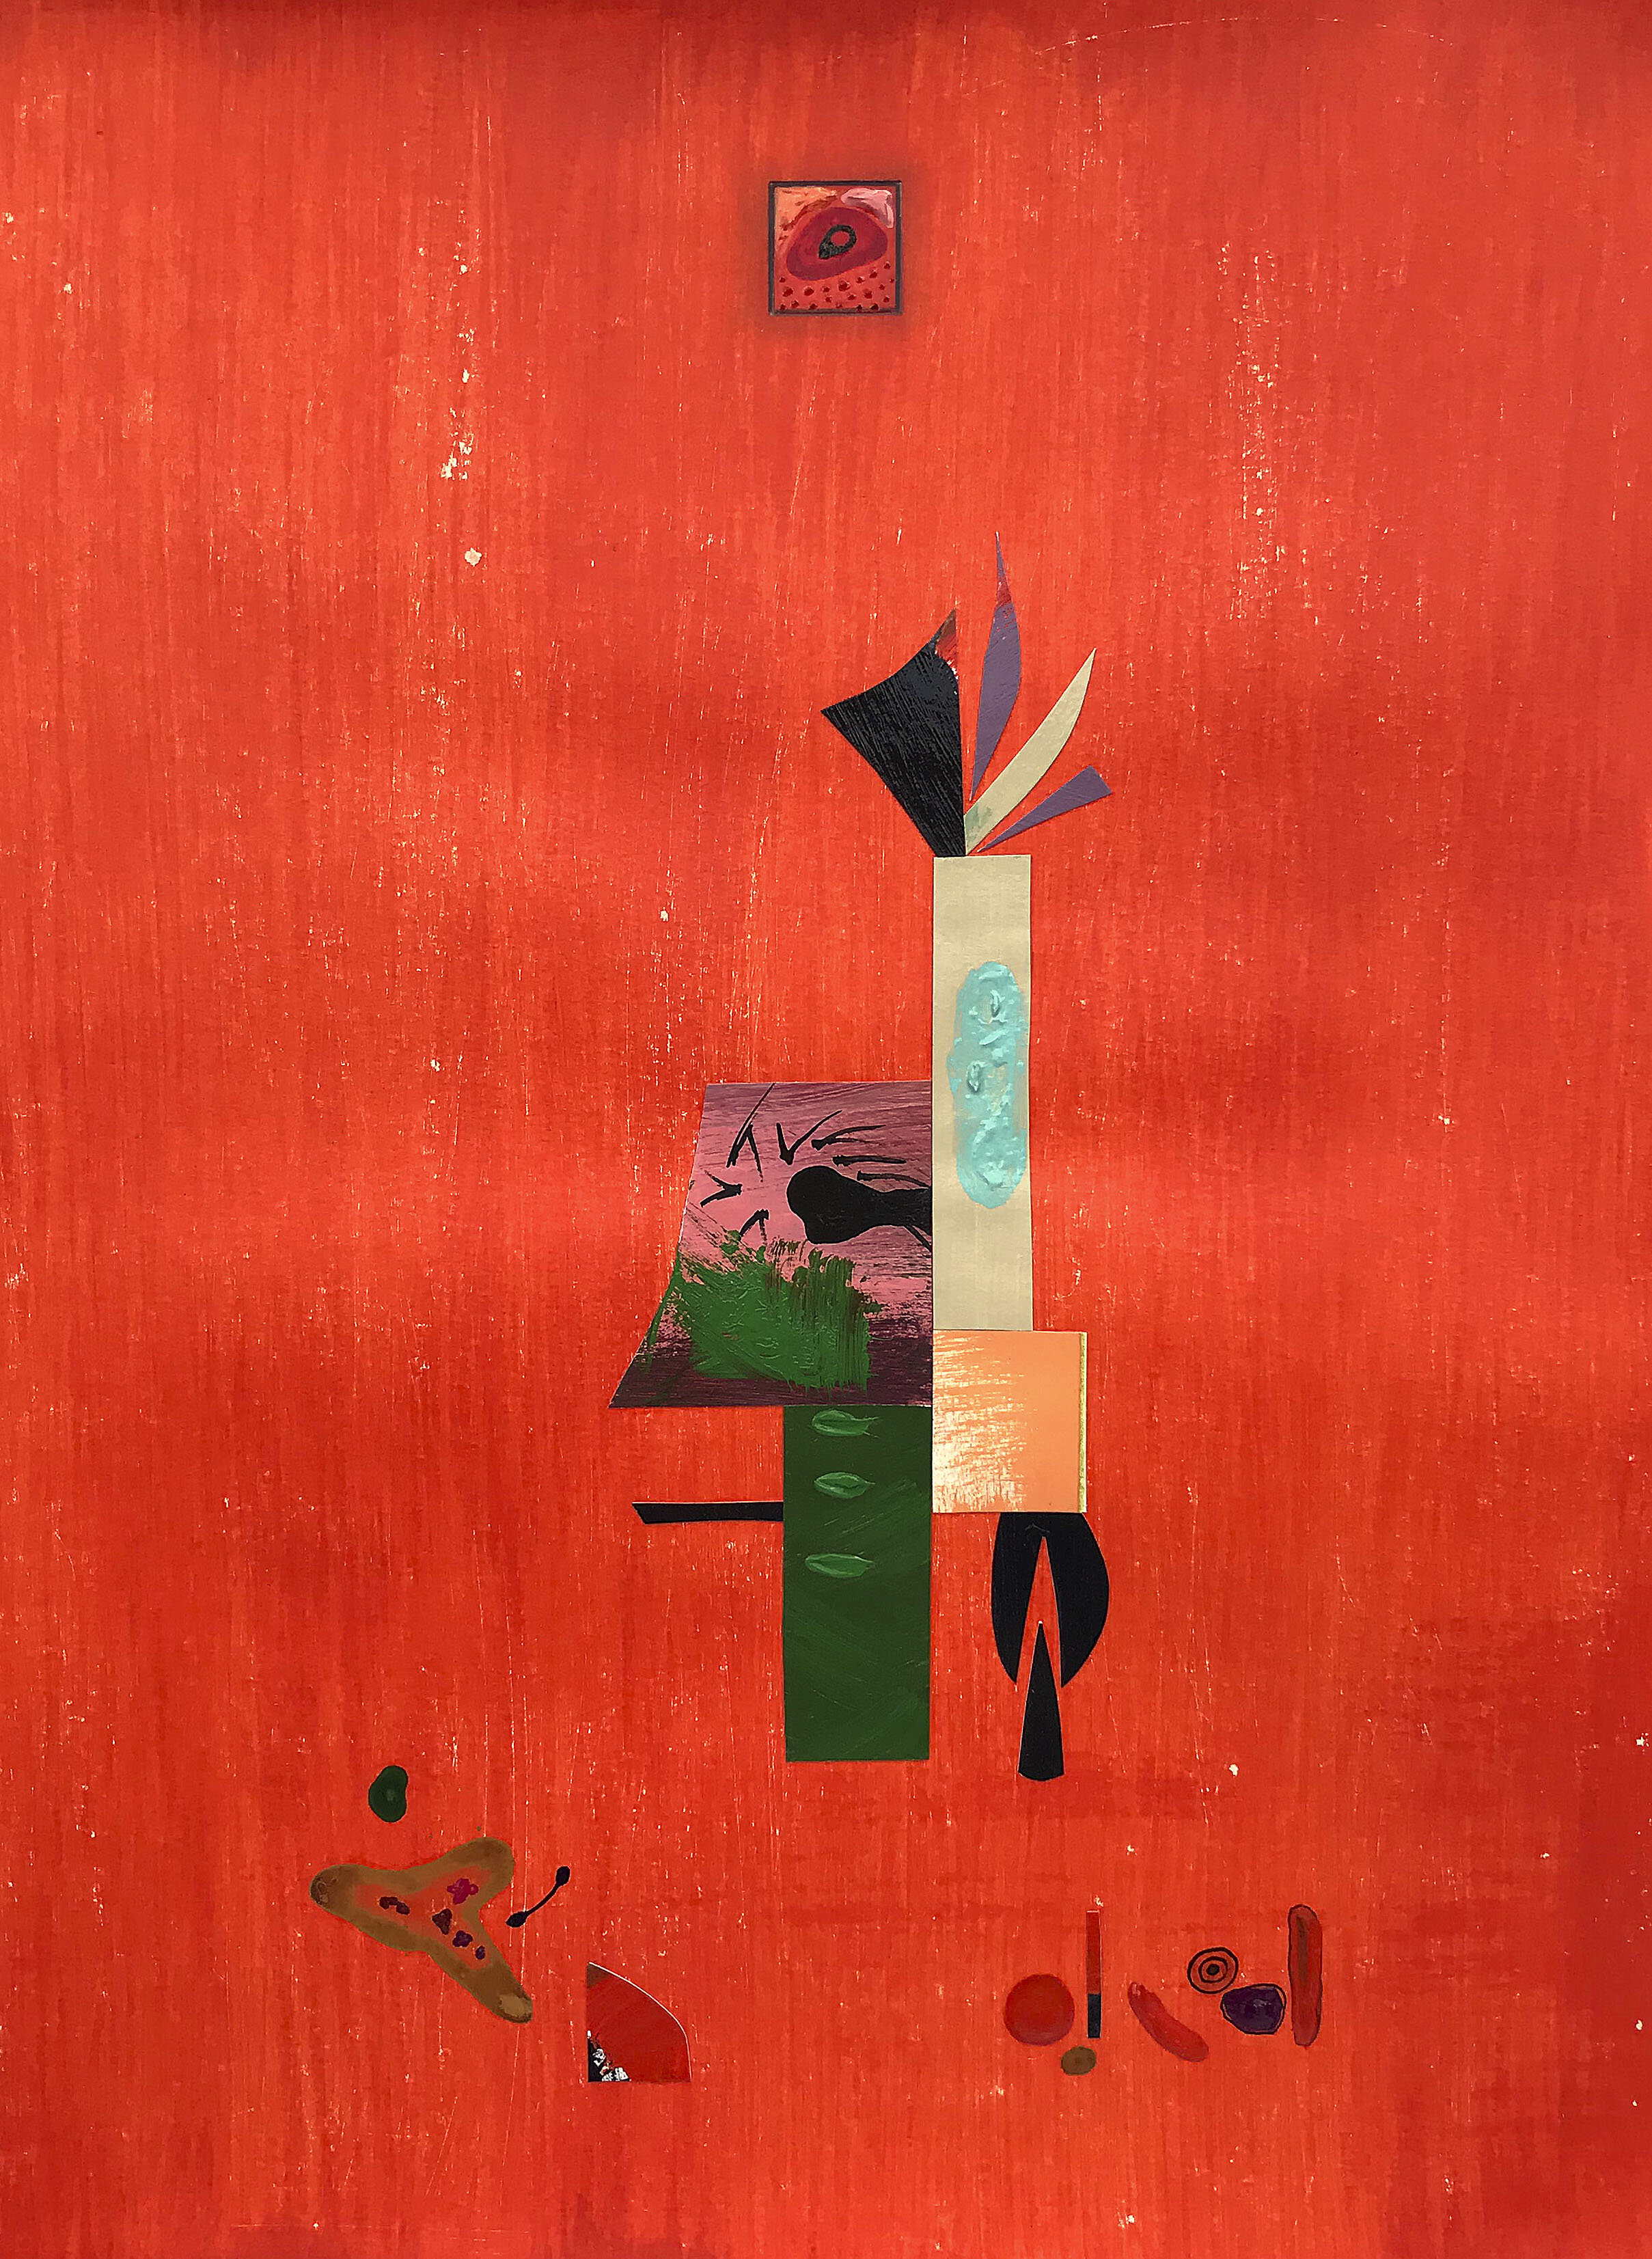  Bill Bailey   Red Orange Totem,   2019 Mixed media on paper 24 x 18 in. YIMBY price $575 